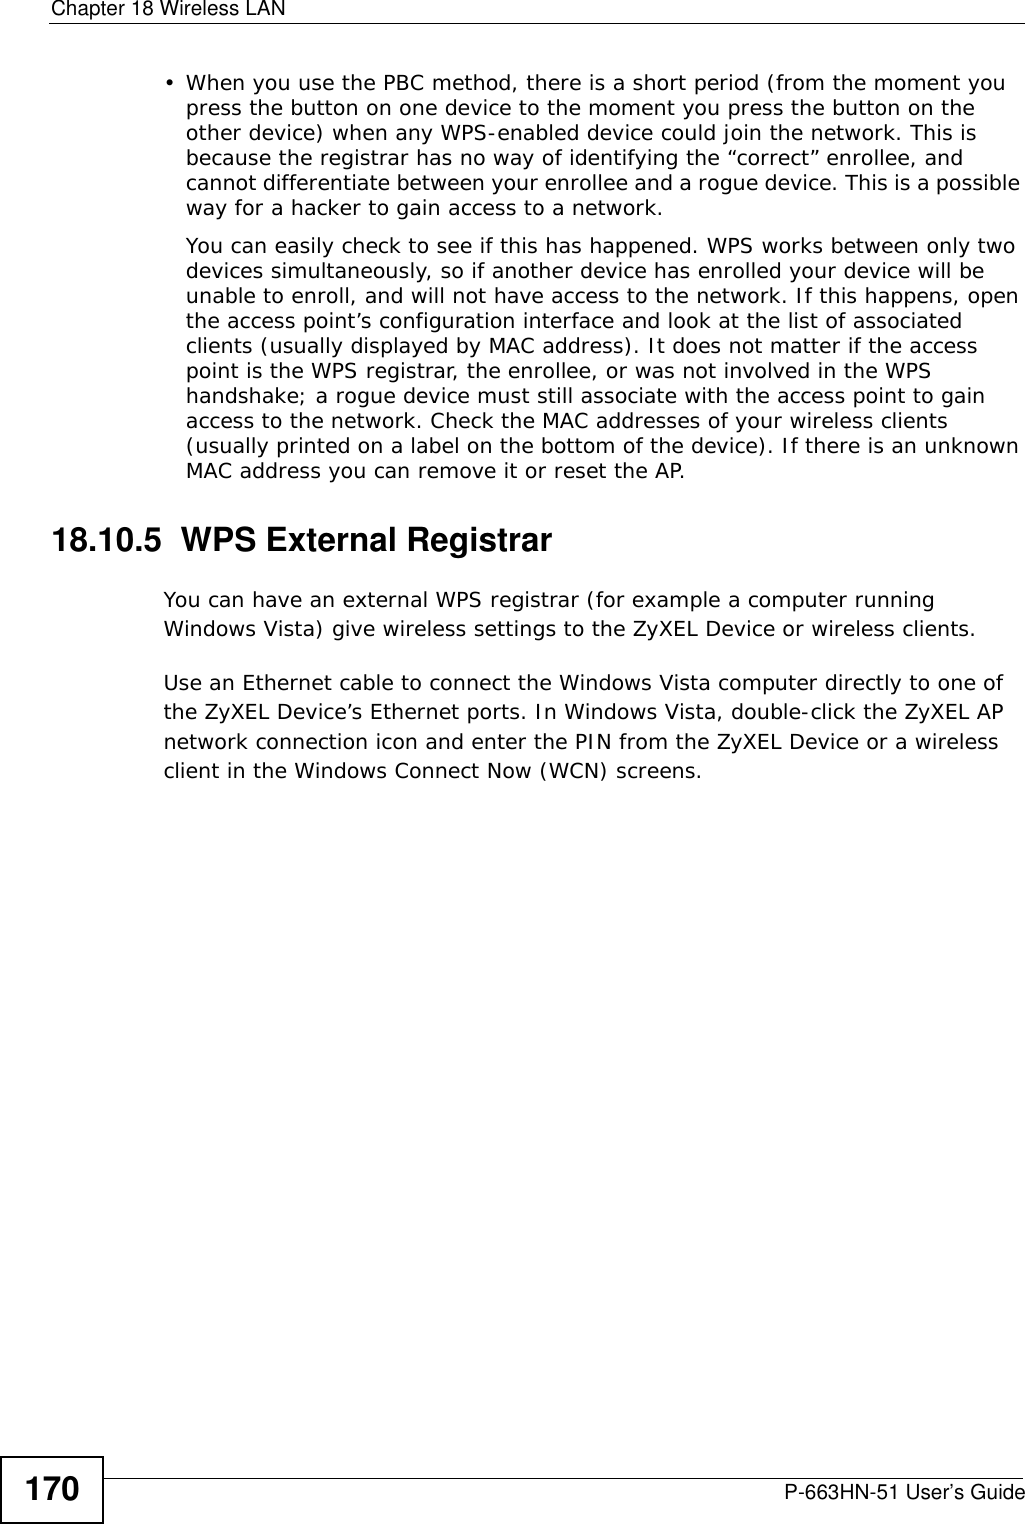 Chapter 18 Wireless LANP-663HN-51 User’s Guide170• When you use the PBC method, there is a short period (from the moment you press the button on one device to the moment you press the button on the other device) when any WPS-enabled device could join the network. This is because the registrar has no way of identifying the “correct” enrollee, and cannot differentiate between your enrollee and a rogue device. This is a possible way for a hacker to gain access to a network.You can easily check to see if this has happened. WPS works between only two devices simultaneously, so if another device has enrolled your device will be unable to enroll, and will not have access to the network. If this happens, open the access point’s configuration interface and look at the list of associated clients (usually displayed by MAC address). It does not matter if the access point is the WPS registrar, the enrollee, or was not involved in the WPS handshake; a rogue device must still associate with the access point to gain access to the network. Check the MAC addresses of your wireless clients (usually printed on a label on the bottom of the device). If there is an unknown MAC address you can remove it or reset the AP. 18.10.5  WPS External RegistrarYou can have an external WPS registrar (for example a computer running Windows Vista) give wireless settings to the ZyXEL Device or wireless clients. Use an Ethernet cable to connect the Windows Vista computer directly to one of the ZyXEL Device’s Ethernet ports. In Windows Vista, double-click the ZyXEL AP network connection icon and enter the PIN from the ZyXEL Device or a wireless client in the Windows Connect Now (WCN) screens.